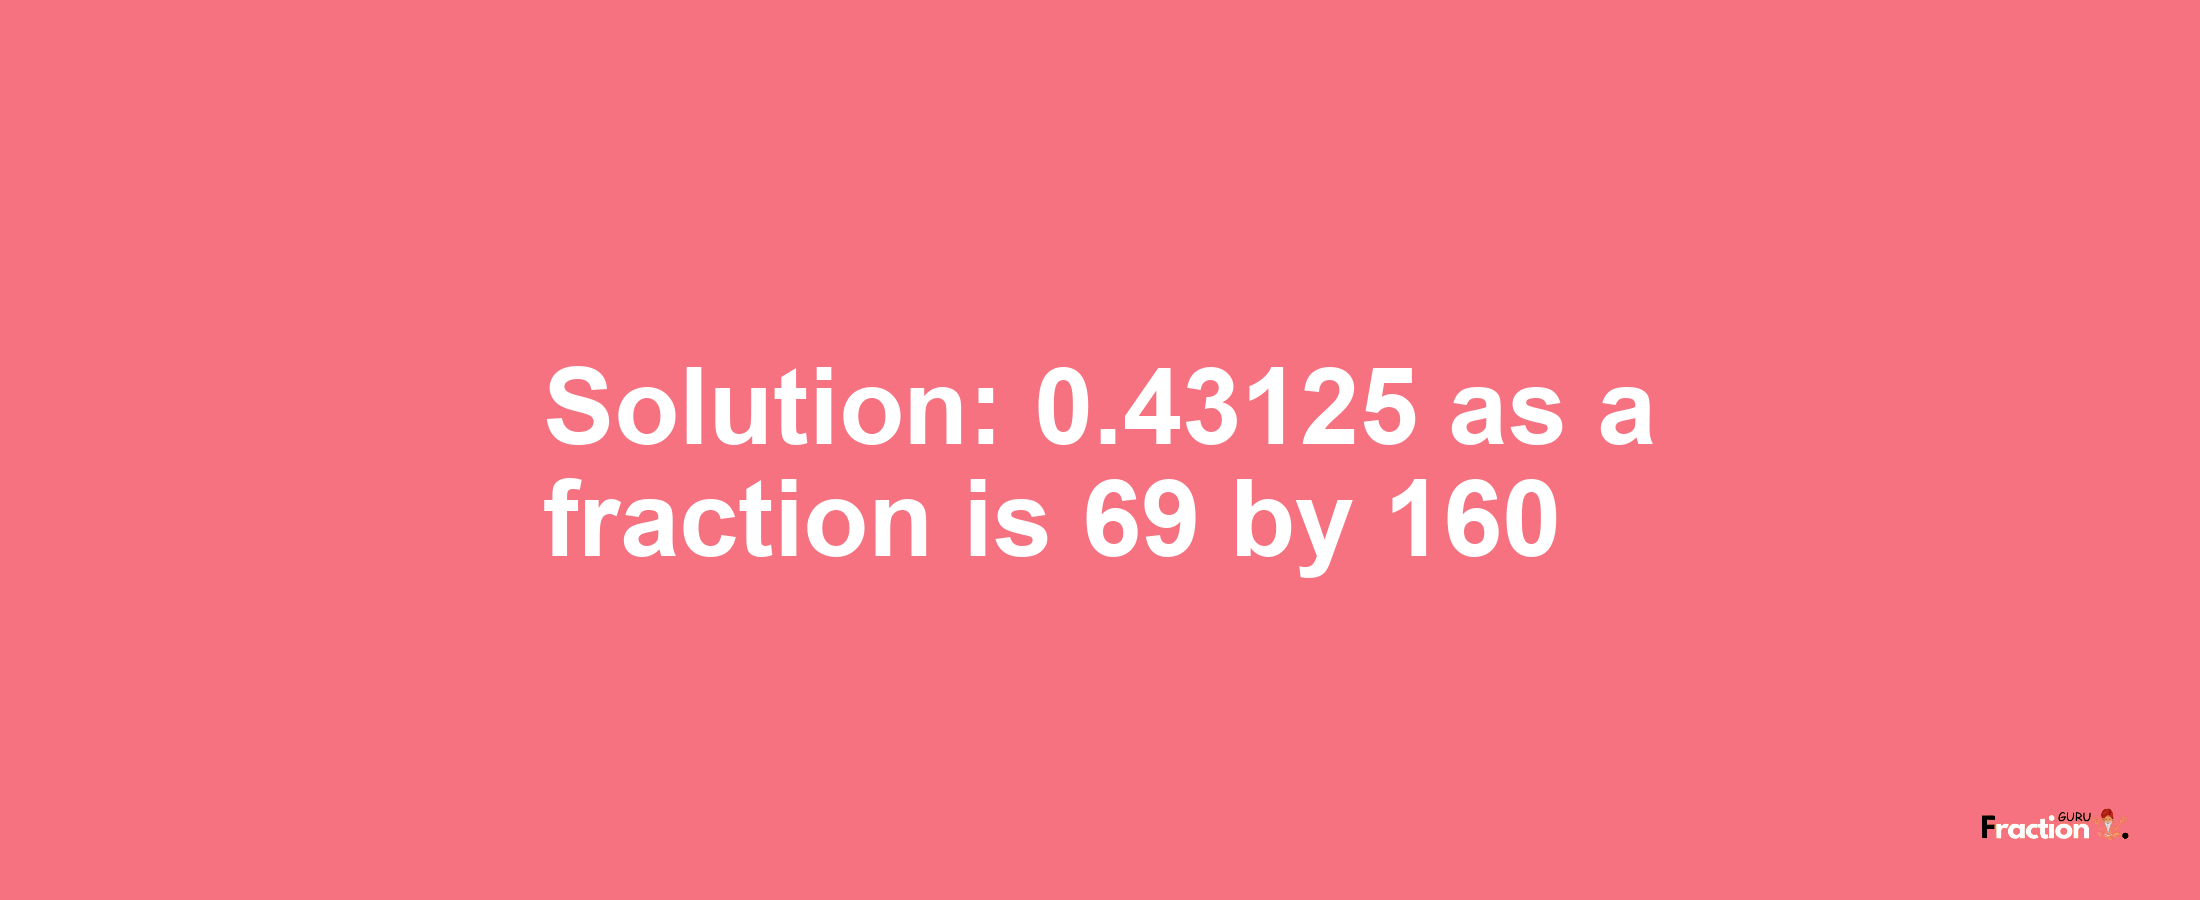 Solution:0.43125 as a fraction is 69/160